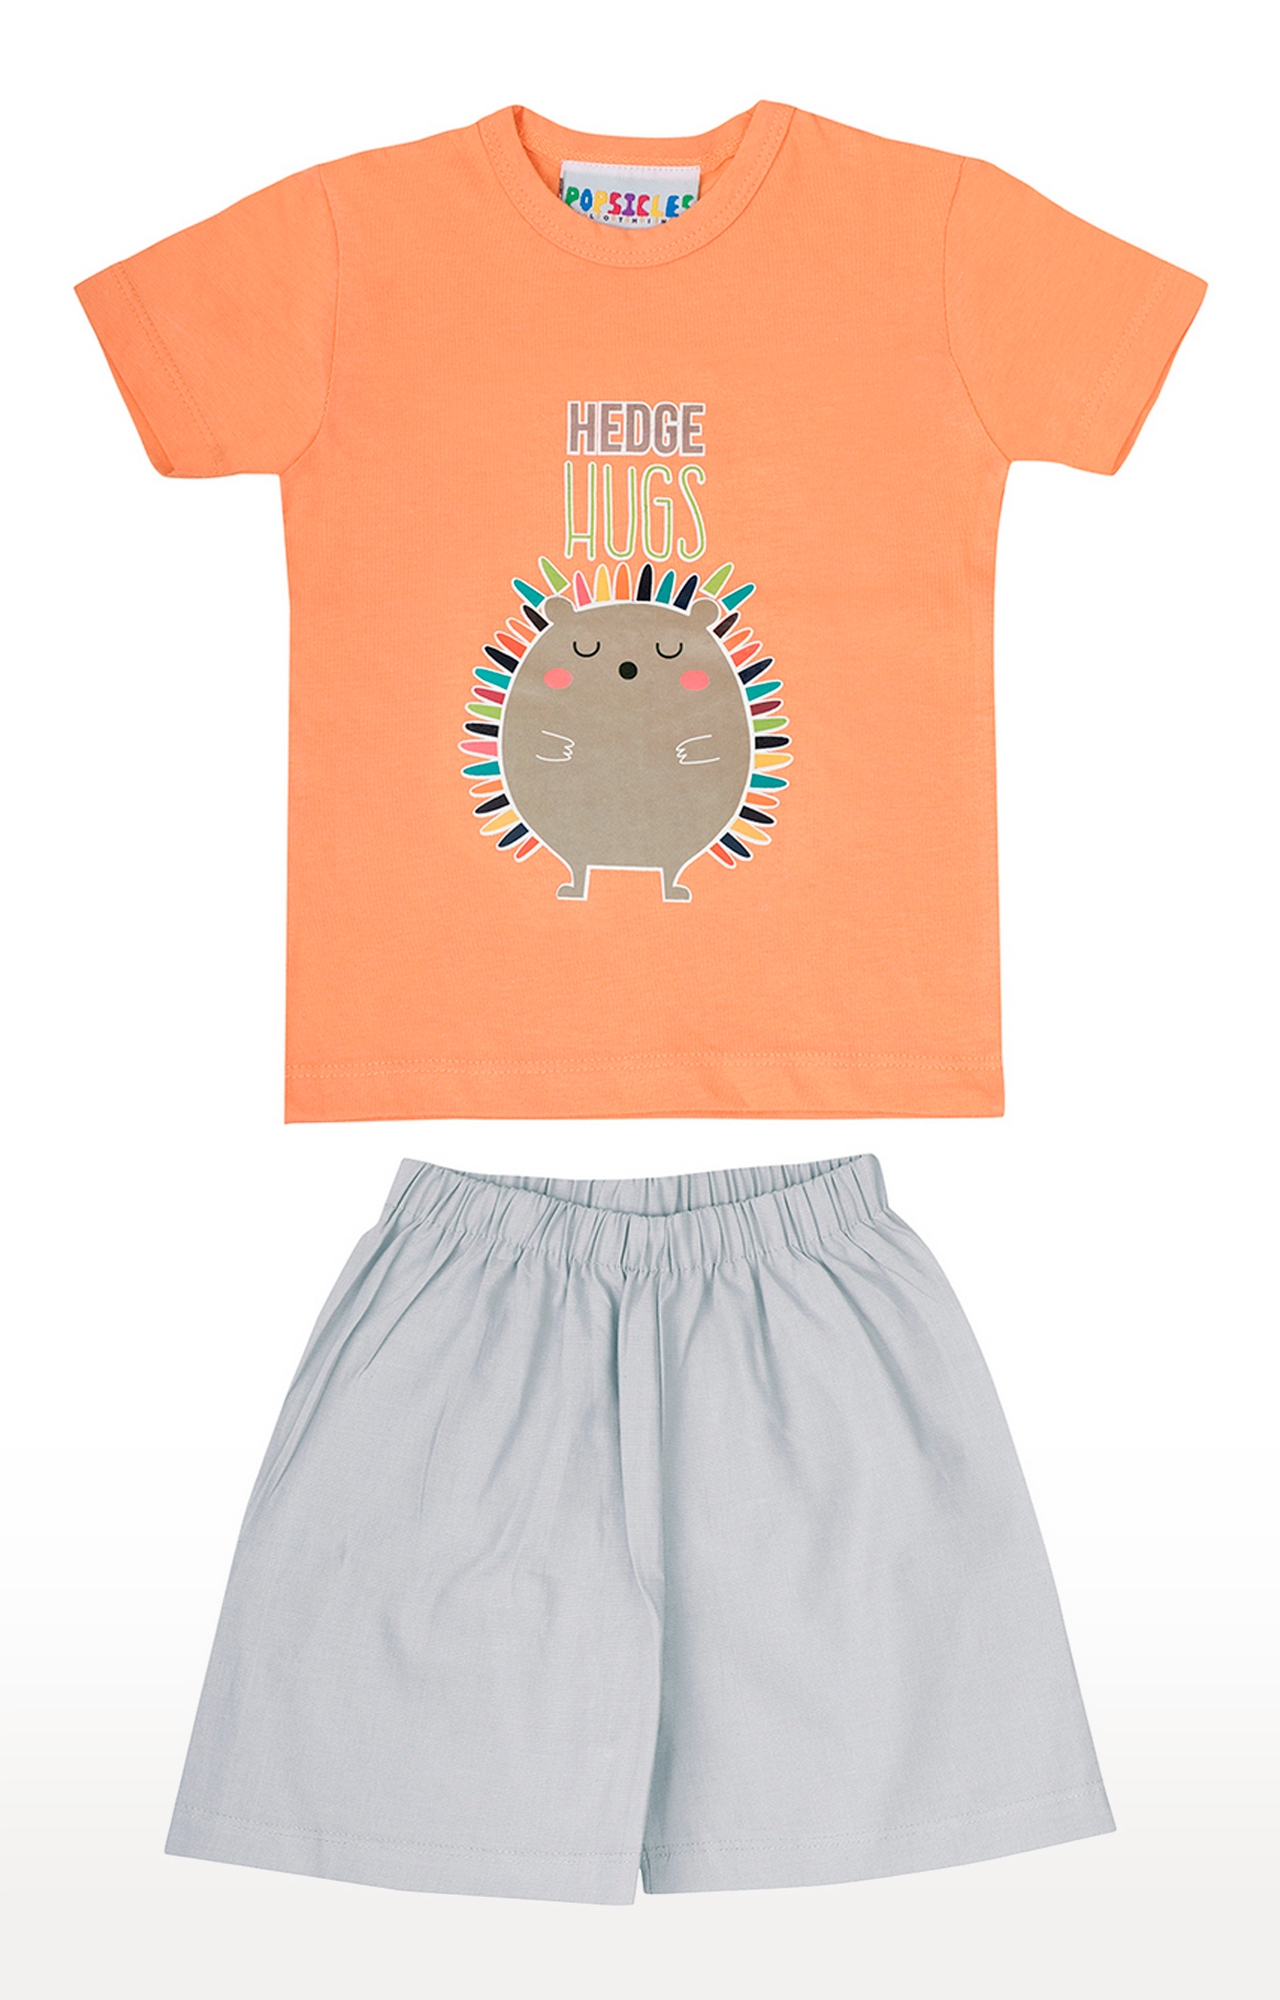 Popsicles Clothing | Popsicles Soft Cotton Comfort fit Round Neck Short Sleeves T-Shirt and Shorts Set for Boys - Orange (0-6M) 0